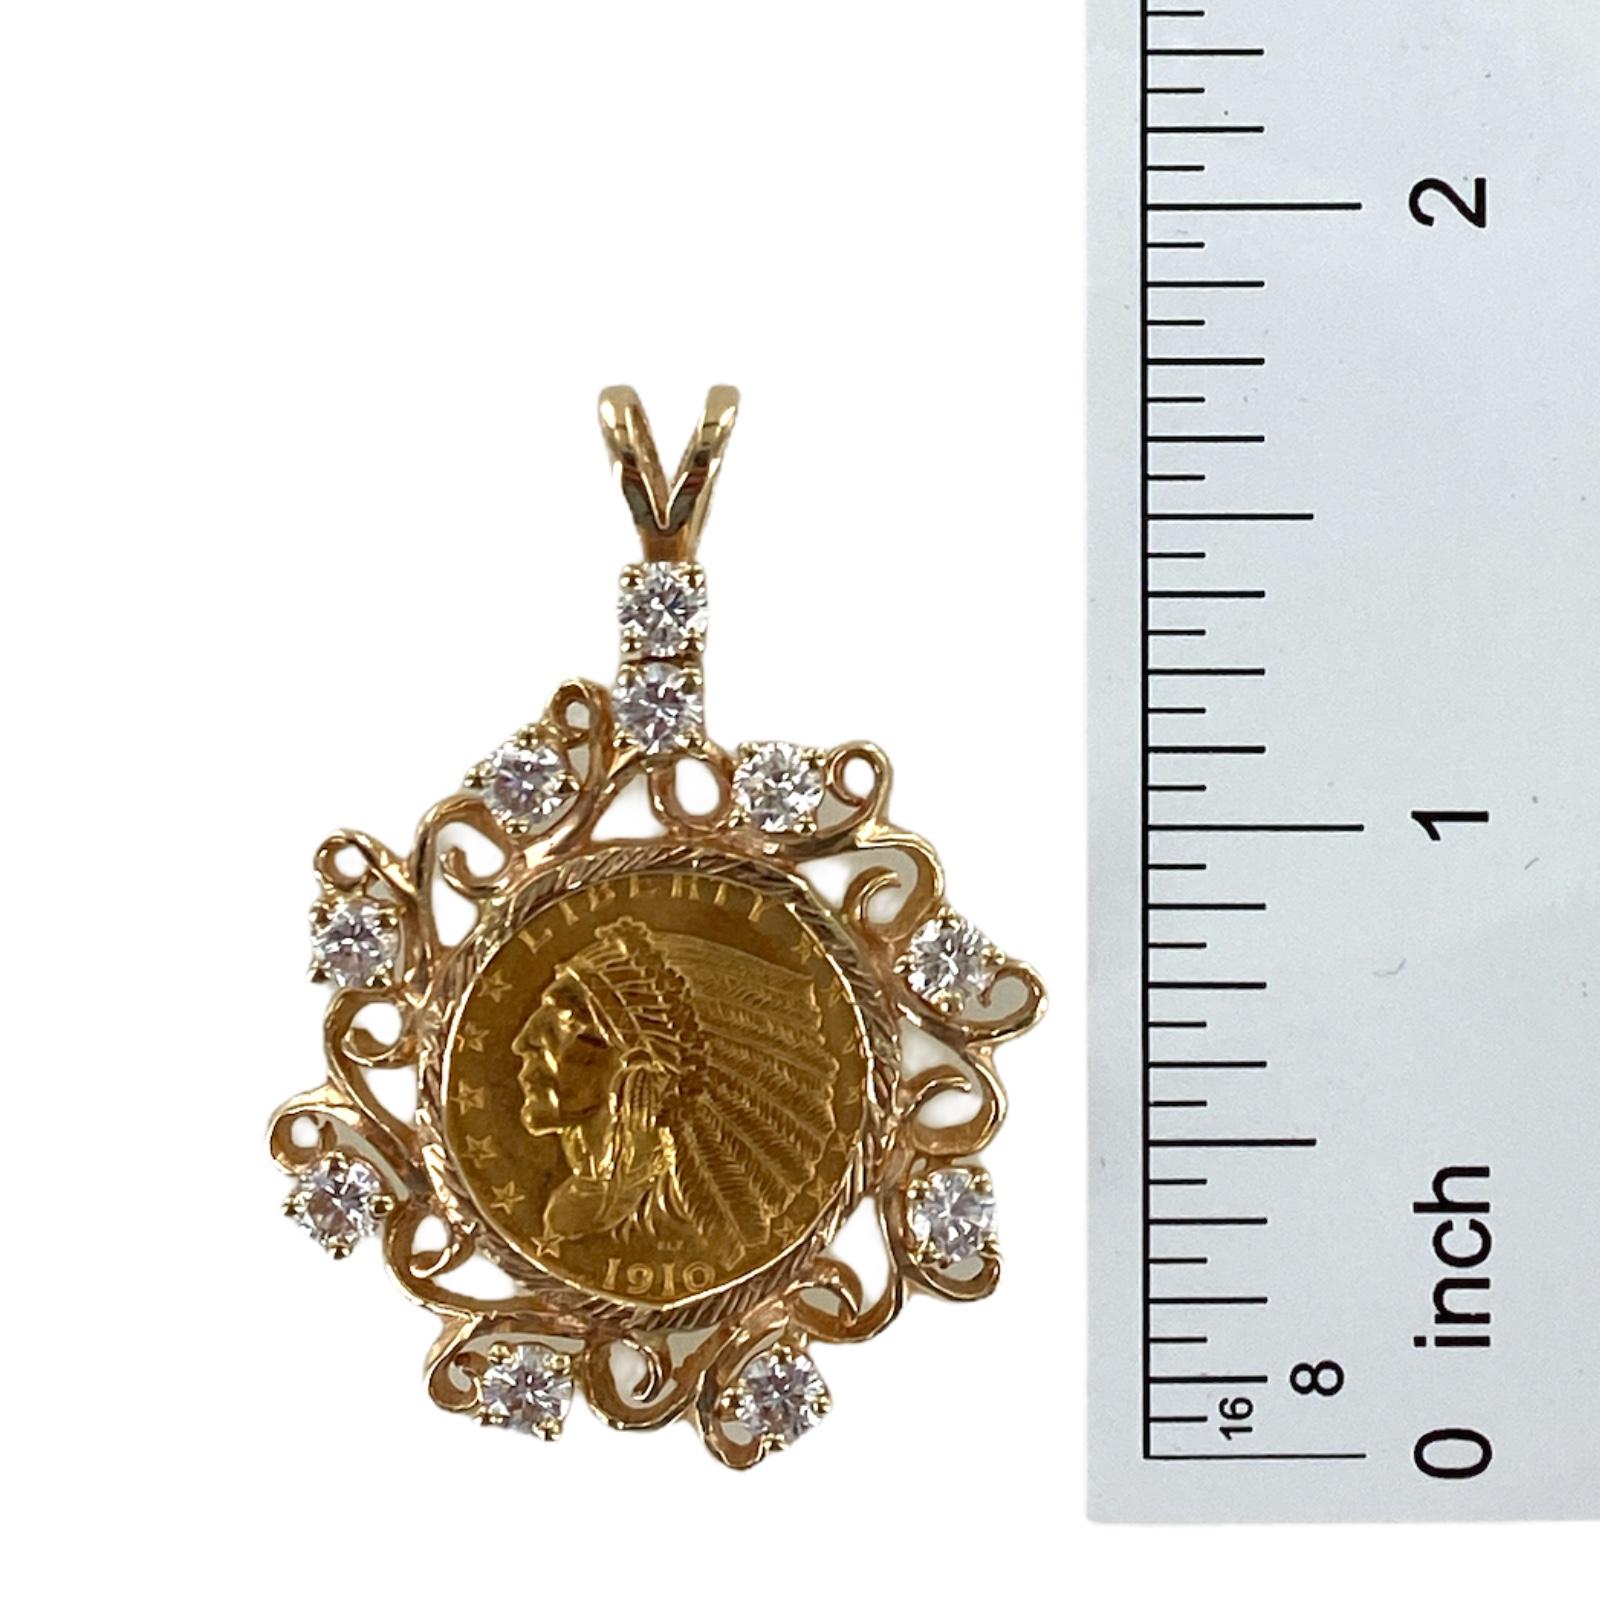 US gold $2.50 Indian head coin is set in a diamond pendant fashioned in 14 karat yellow gold. The gold coin is 90% and circa 1910. The 10 round brilliant cut diamonds weigh approximately 1.50 carat total weight and are graded H-I color and SI